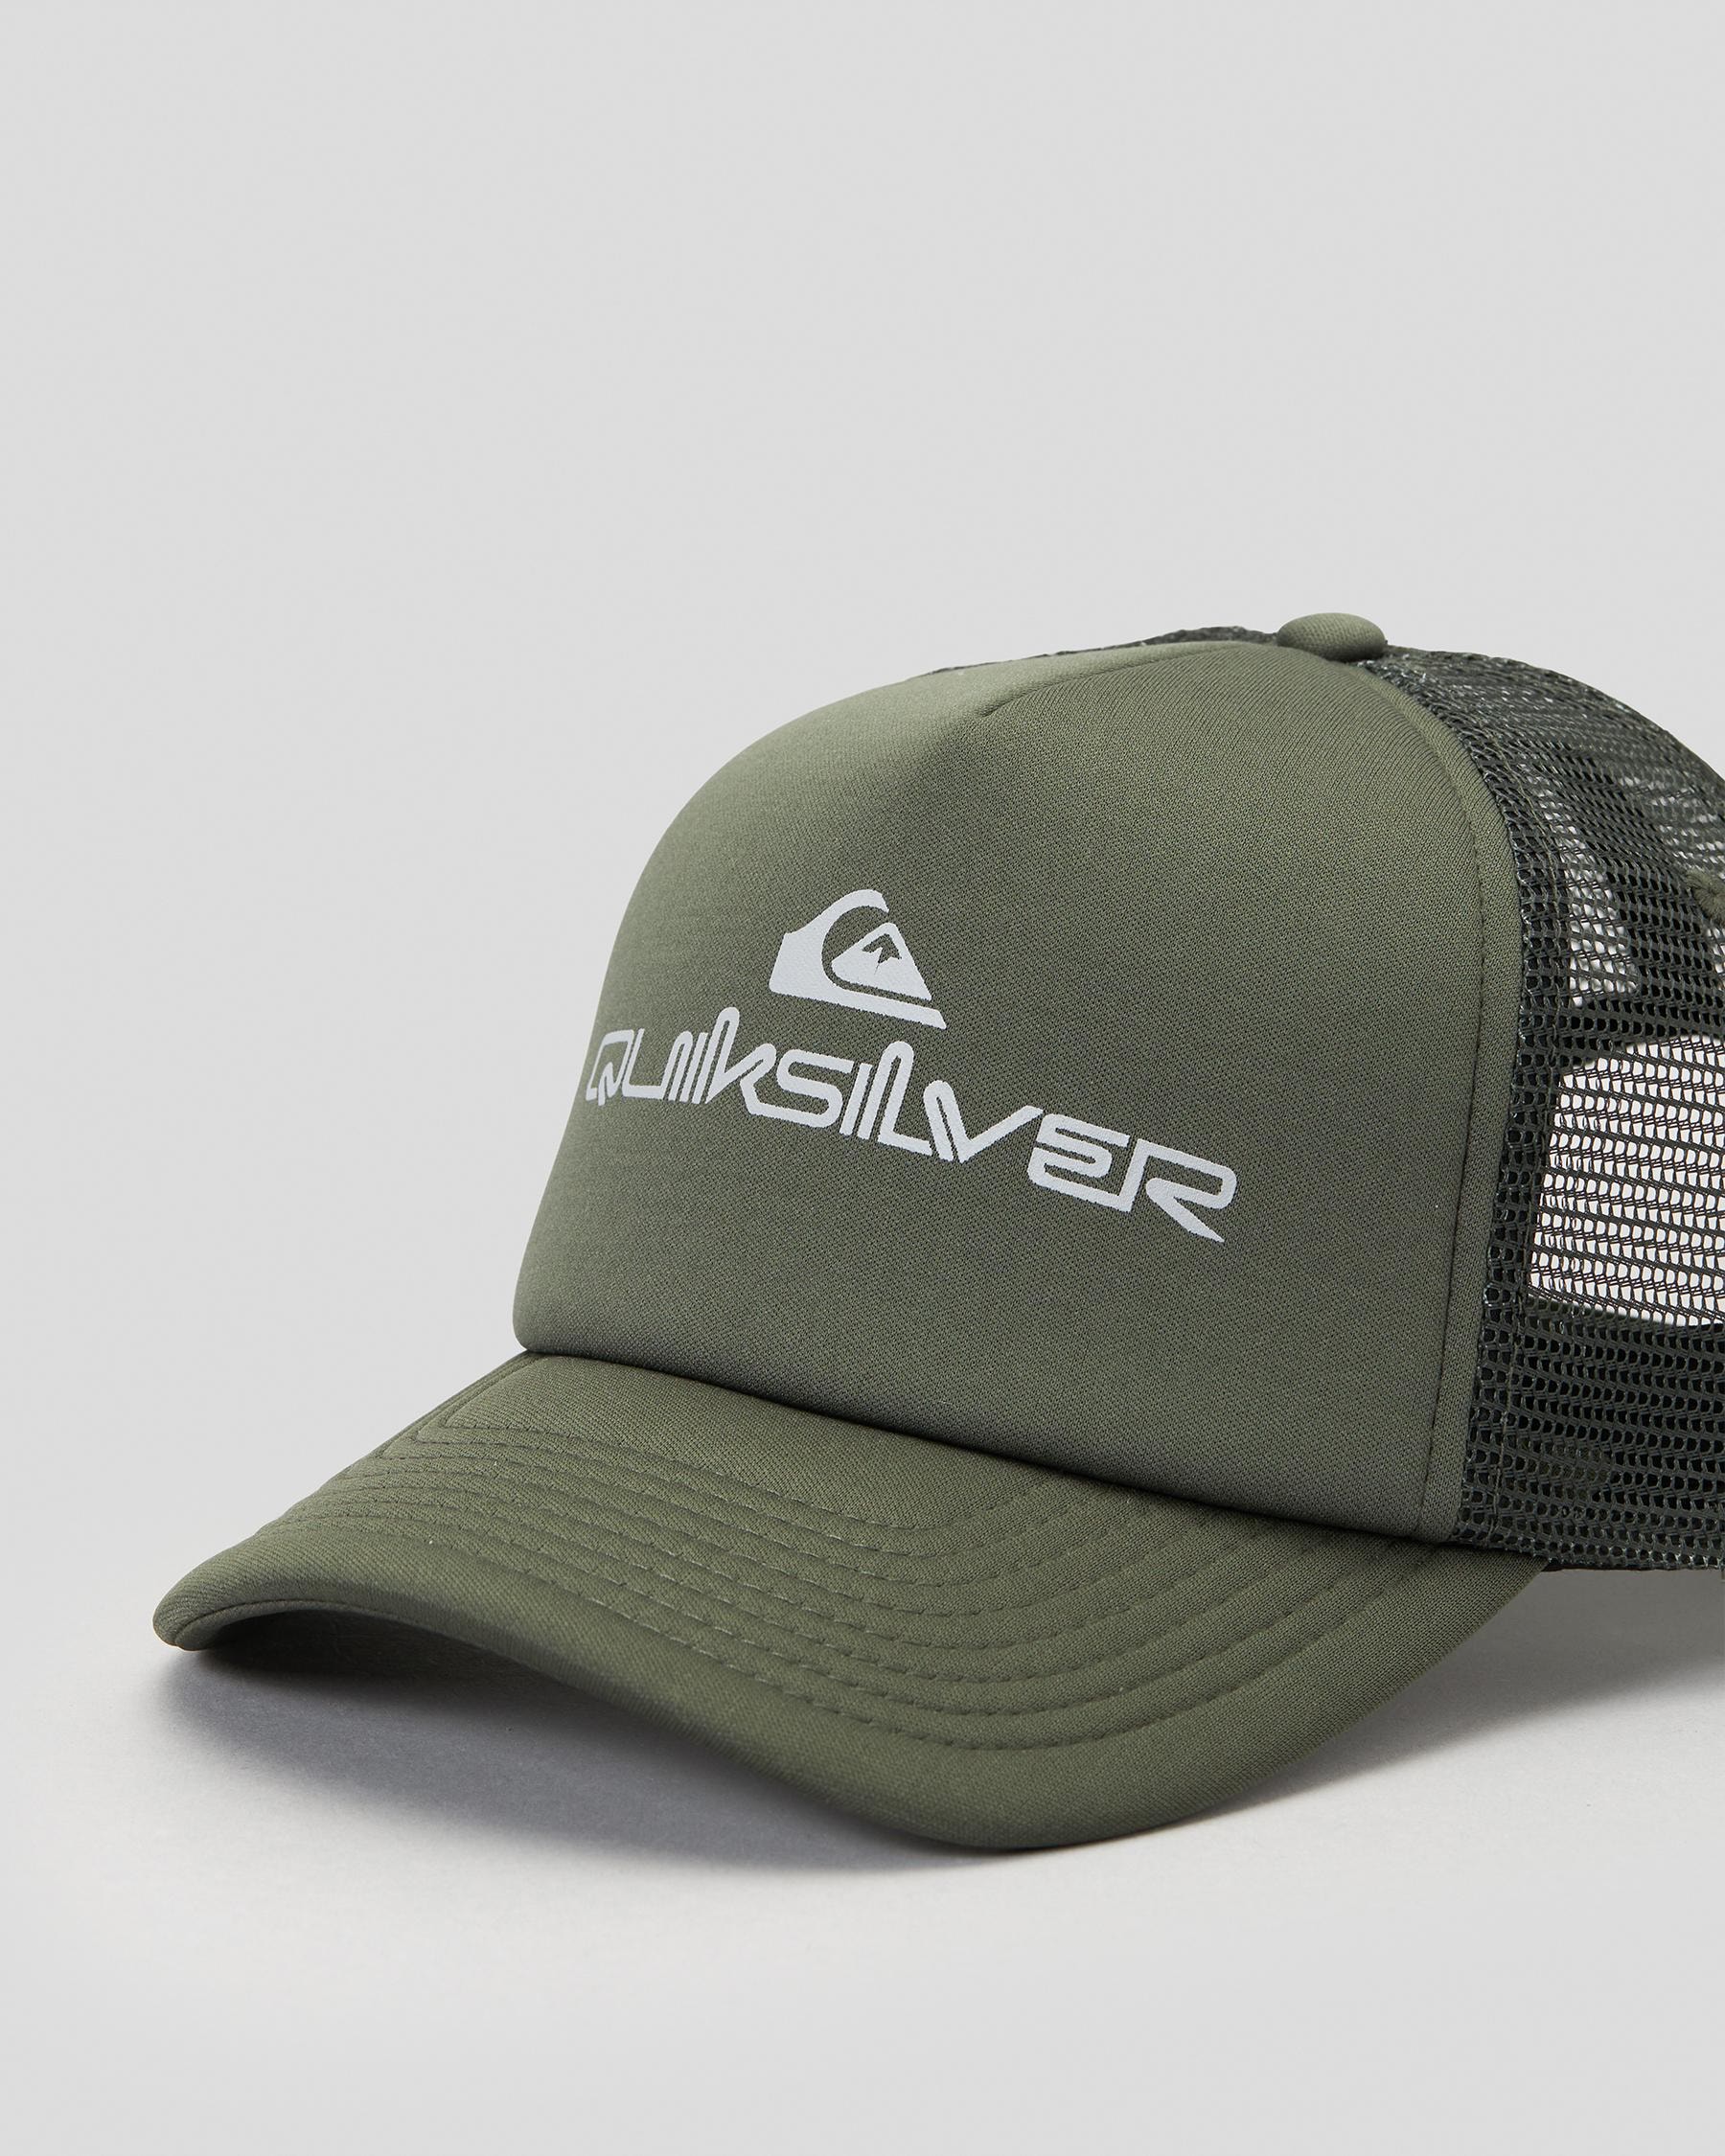 FREE* In Omnistack City Easy Trucker Beach - - Returns Shipping States Quiksilver United Cap & Thyme